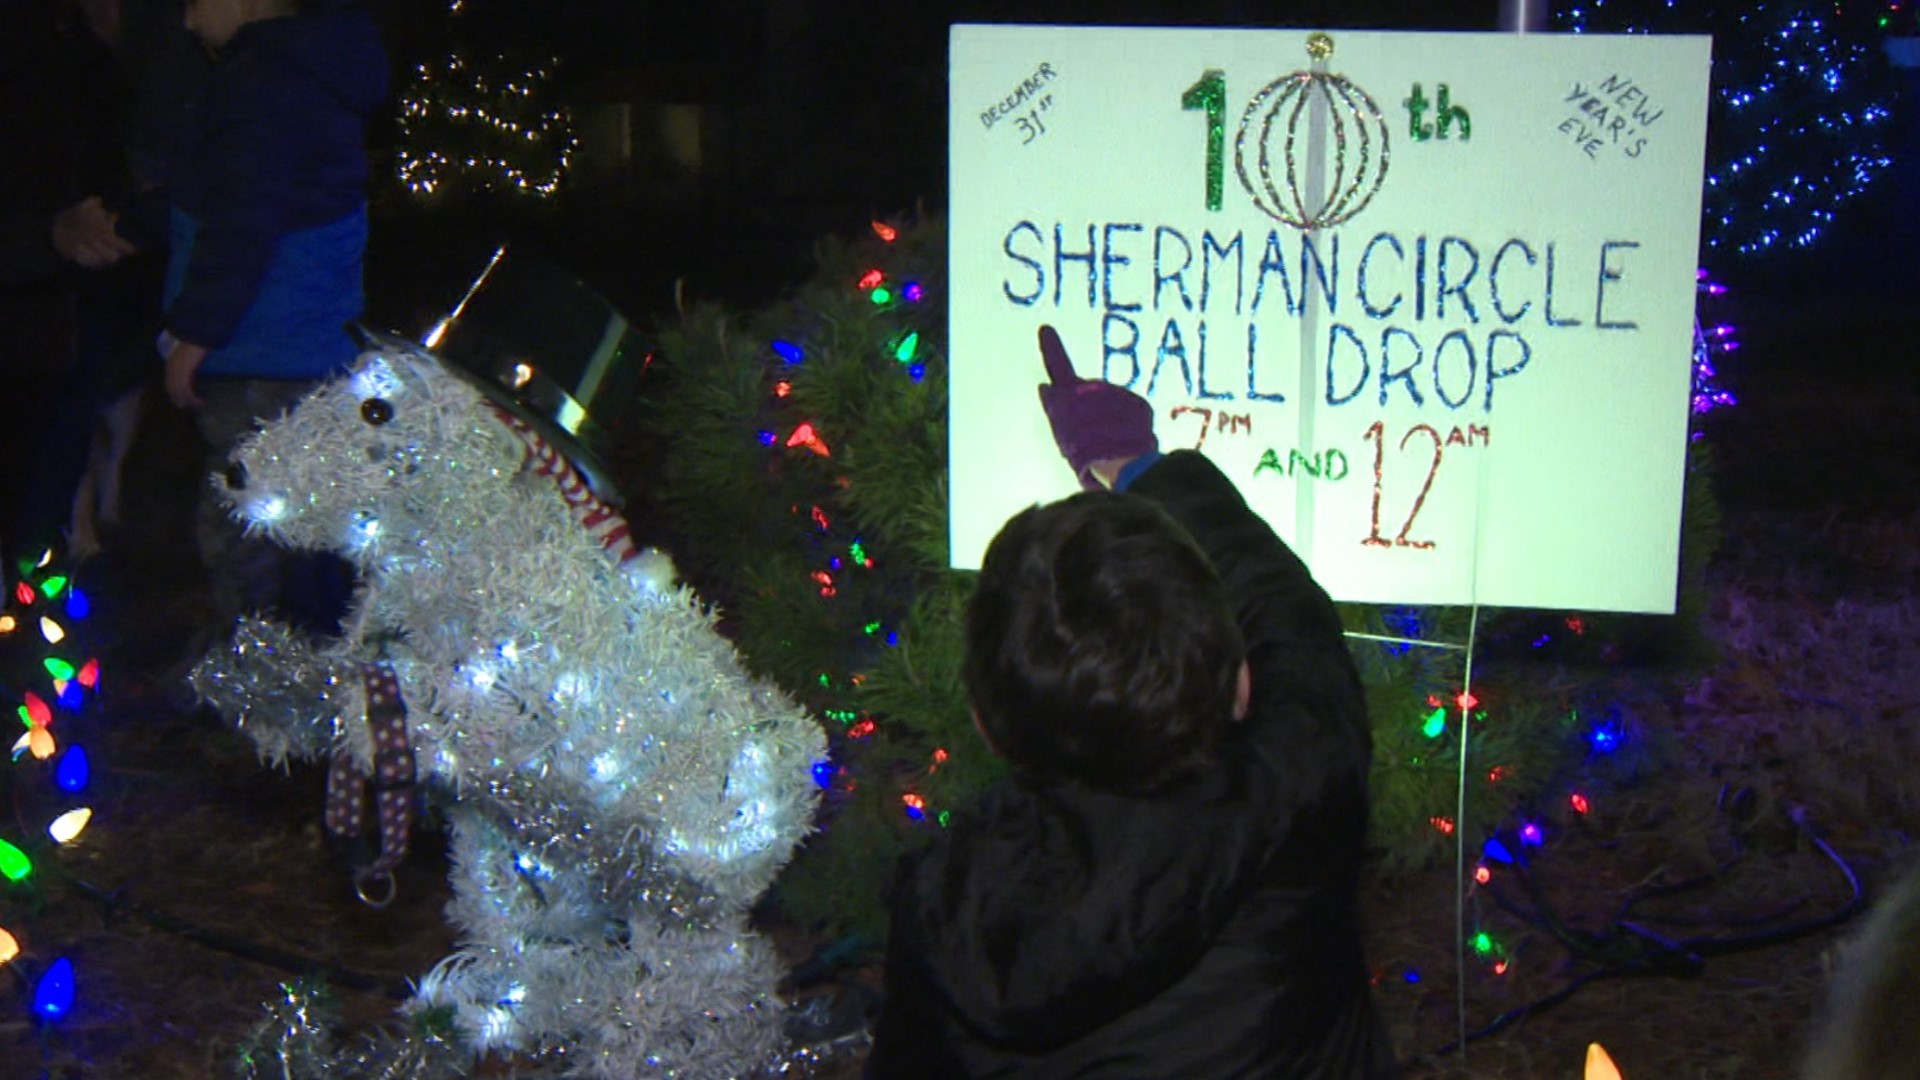 Chris Rowland and Curtis Gilbert began hosting the ball drop in their front yard in 2014.